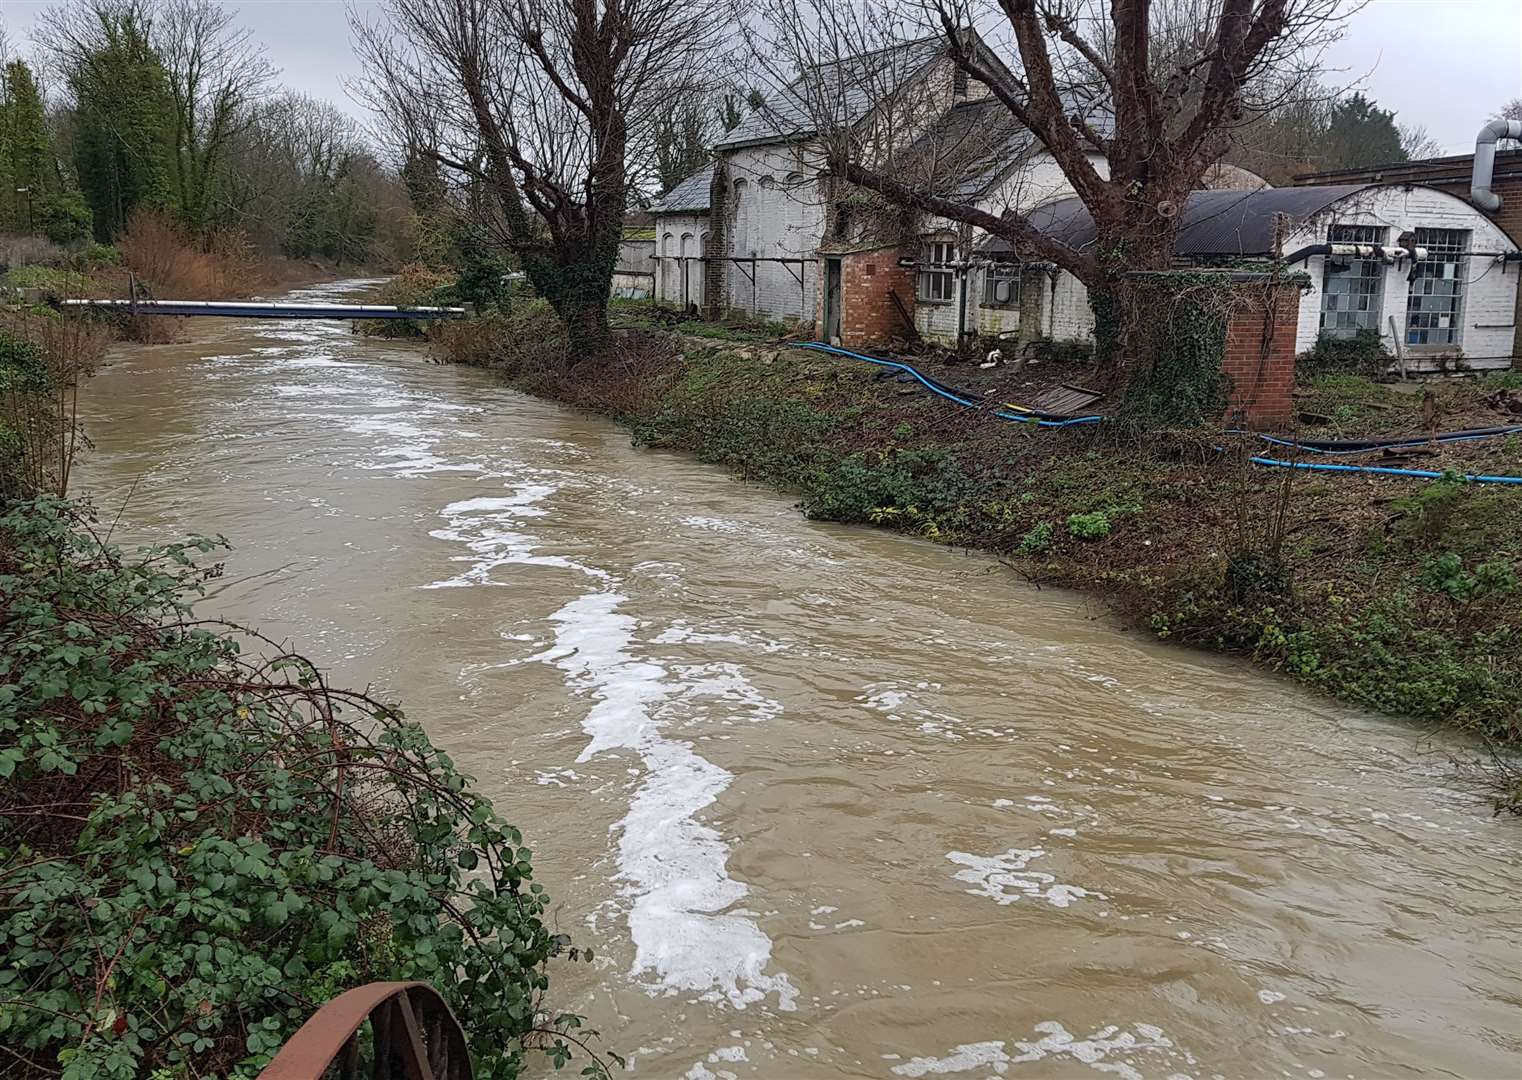 The river was high in Chartham this weekend